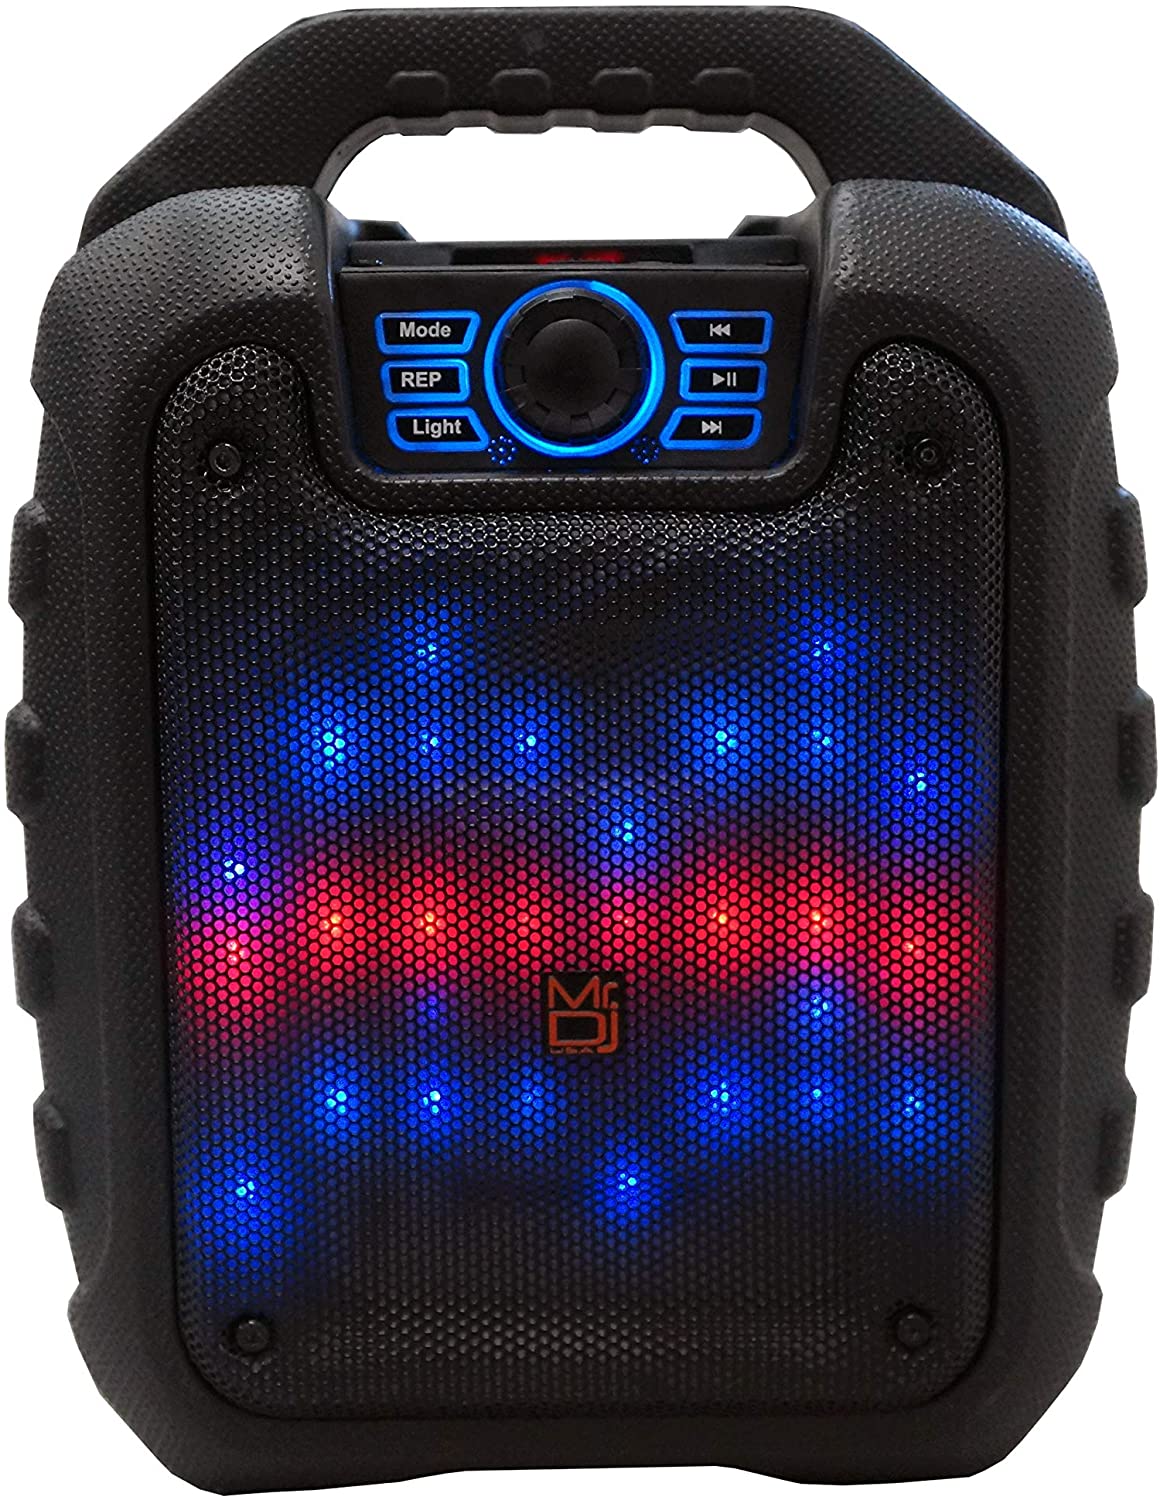 Mr. Dj Disco Bluetooth Speaker<br/>Wireless Portable Bluetooth Speaker Karaoke Machine with Sound Activated Lights, Battery Powered, FM Radio, USB/Micro SD Card, & LED Party Light